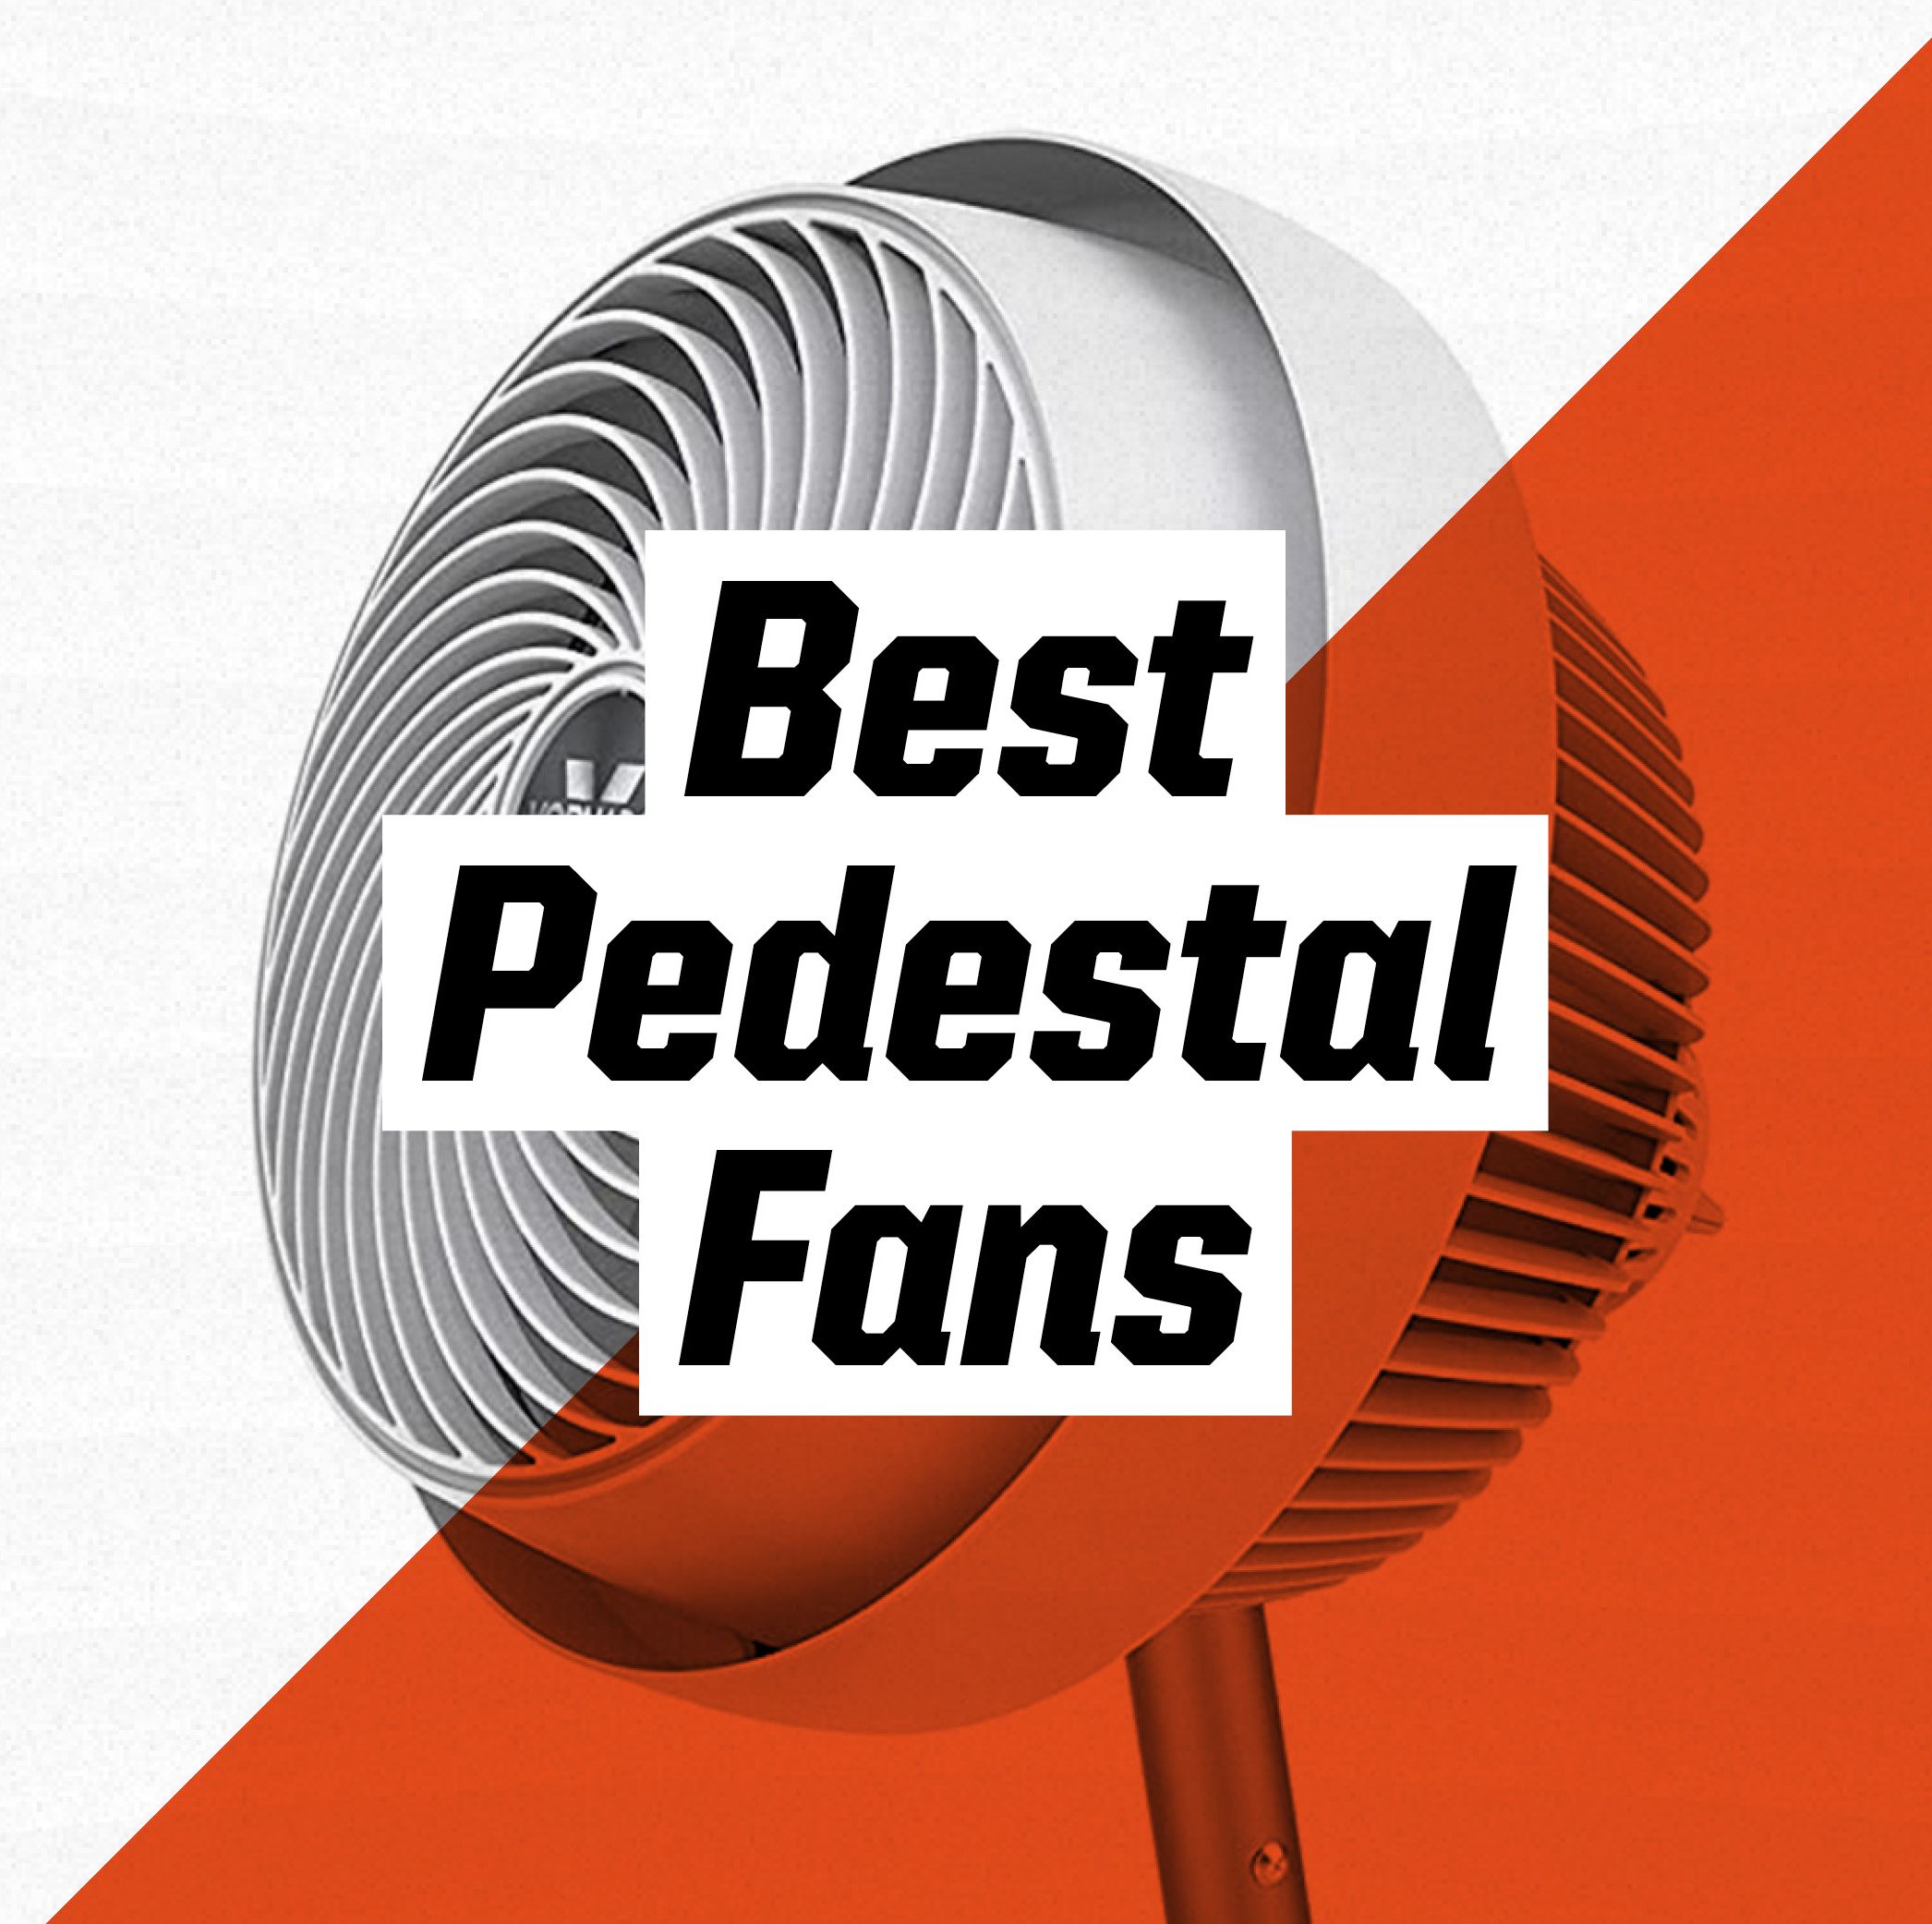 The 10 Best Pedestal Fans for Every Room in Your Home